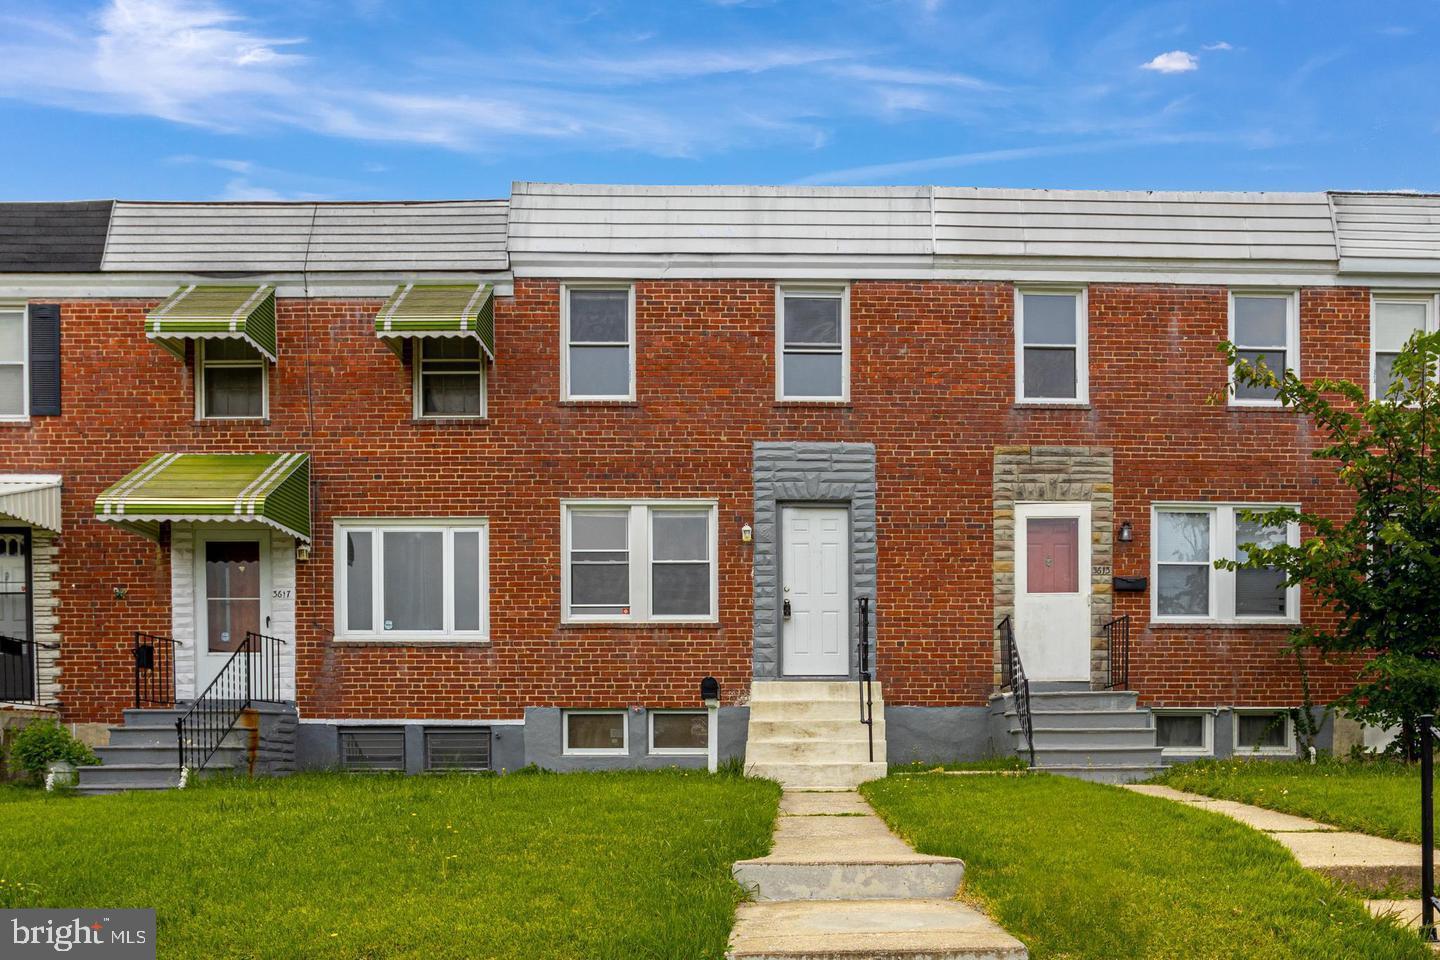 View Baltimore, MD 21213 townhome